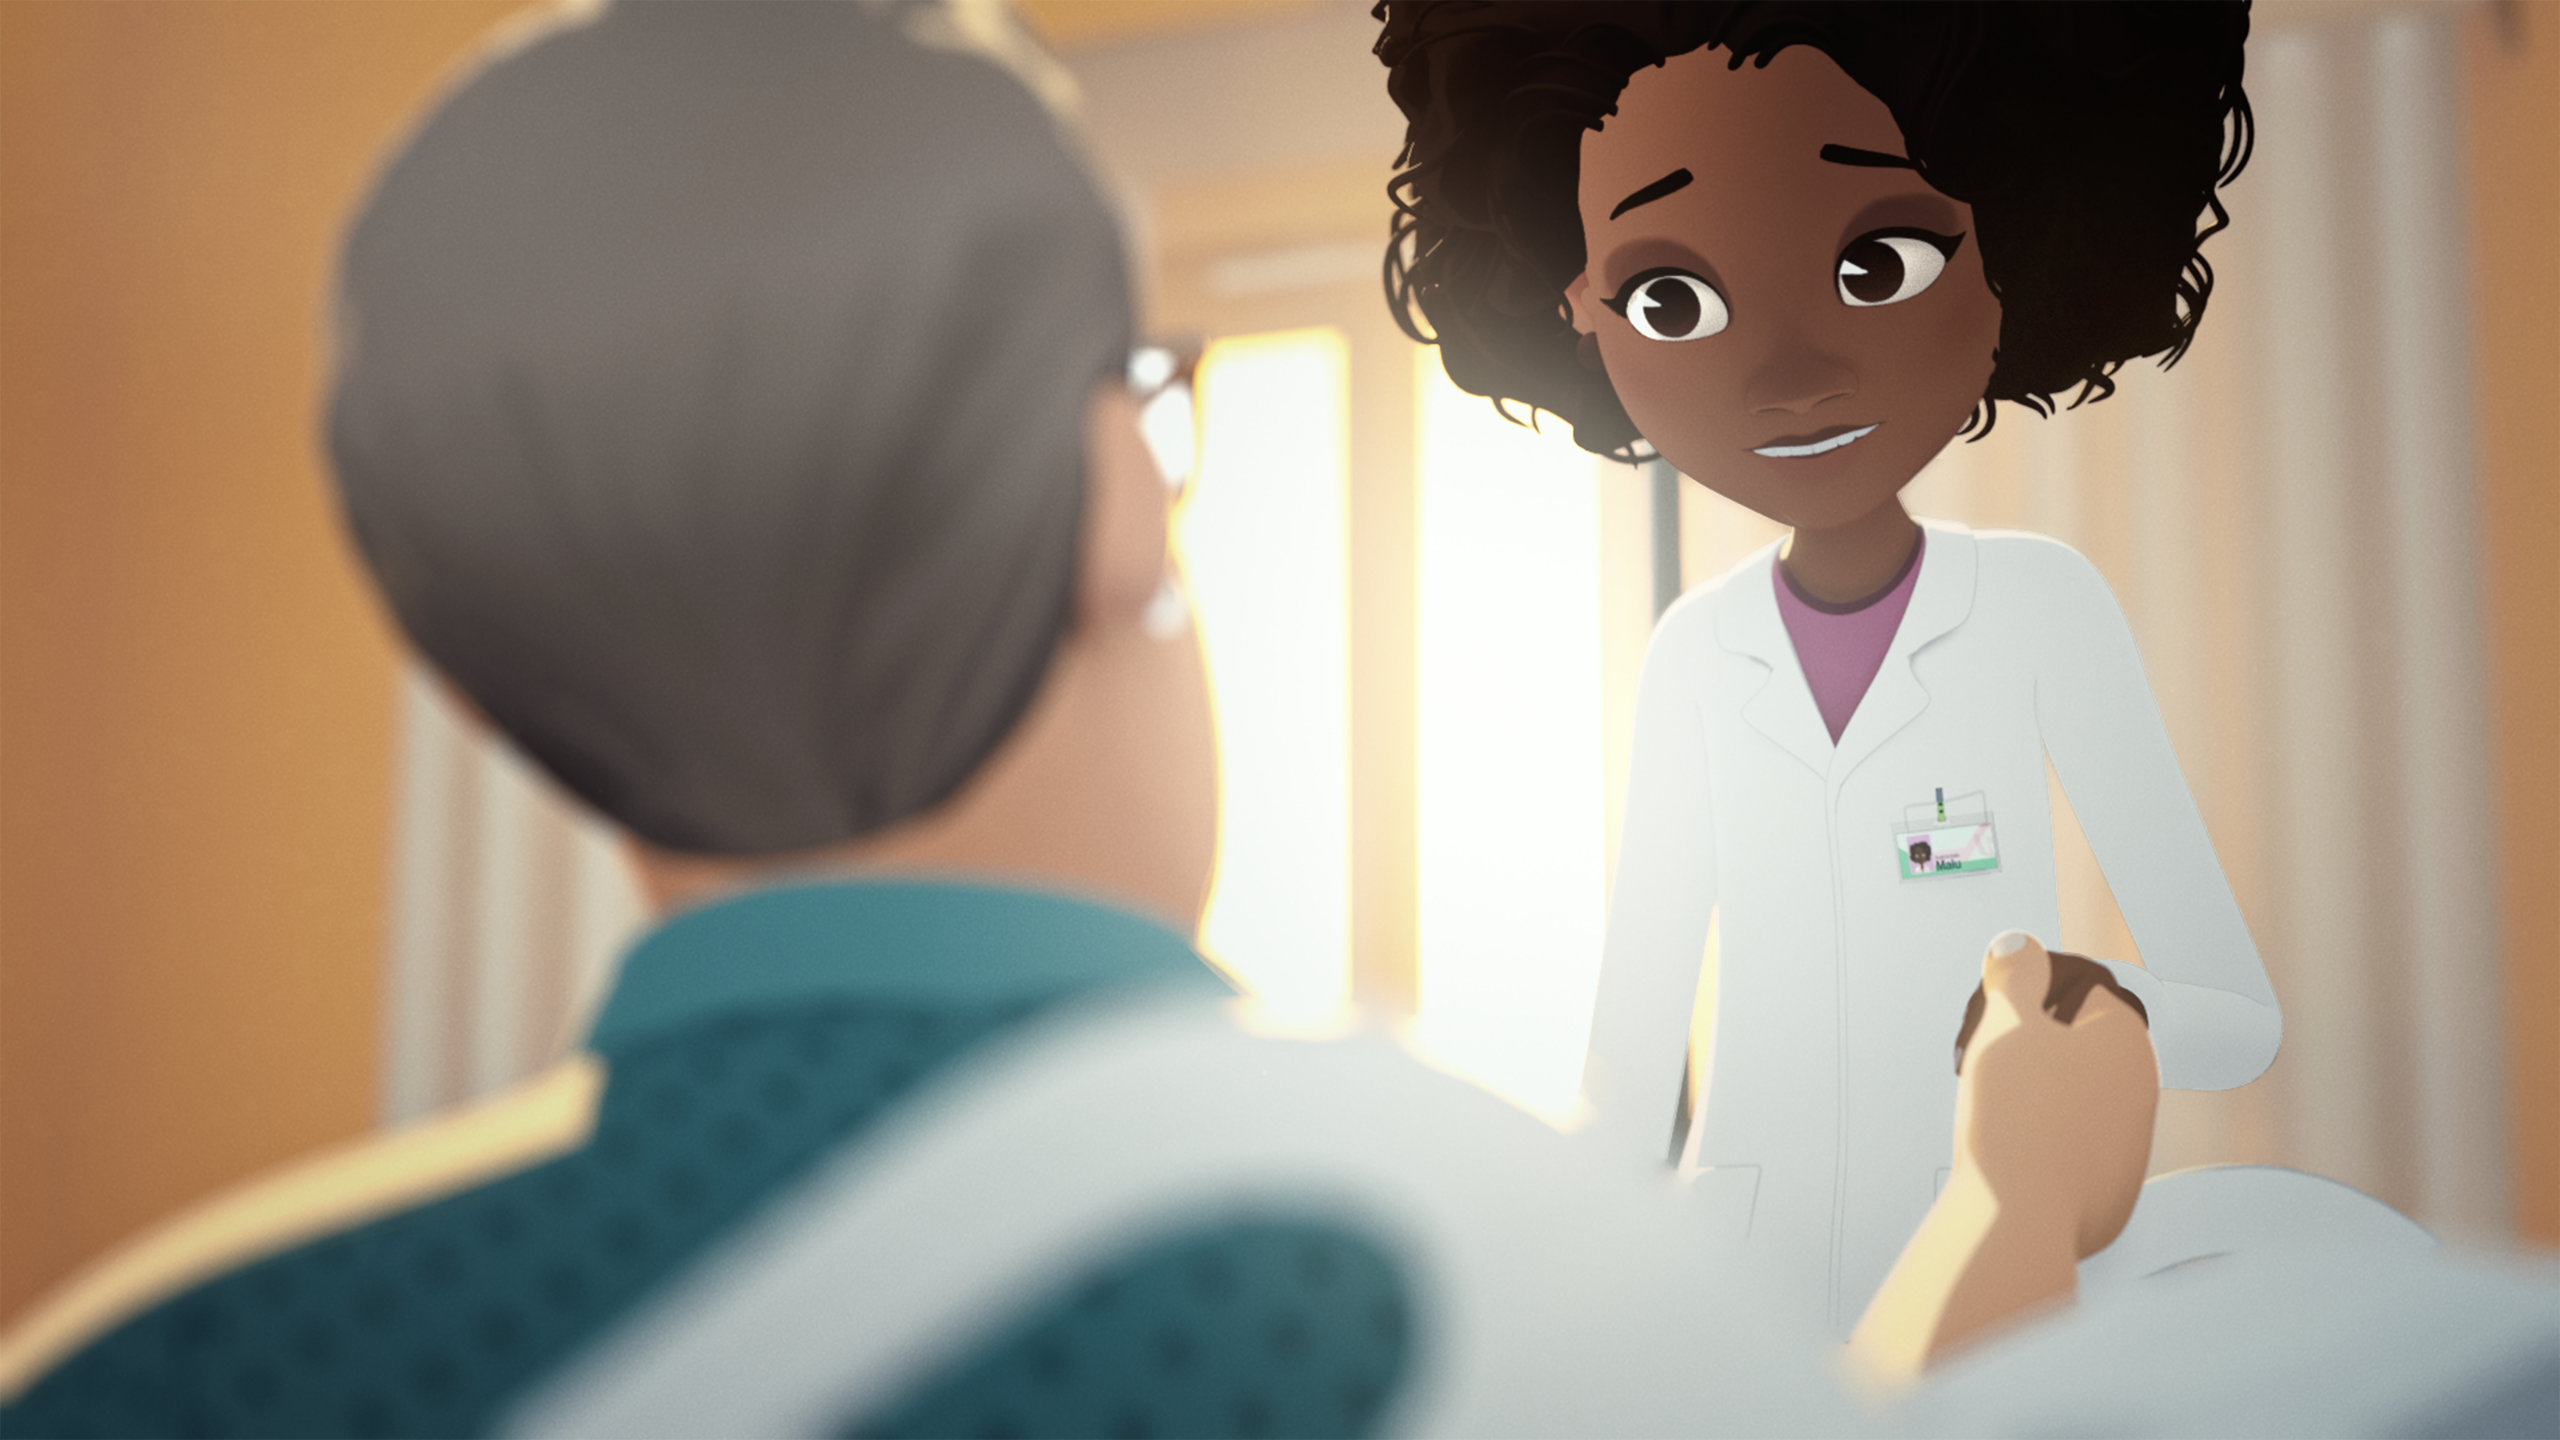 Nutrition Brings People Together in Animated Nestle Health Science Film